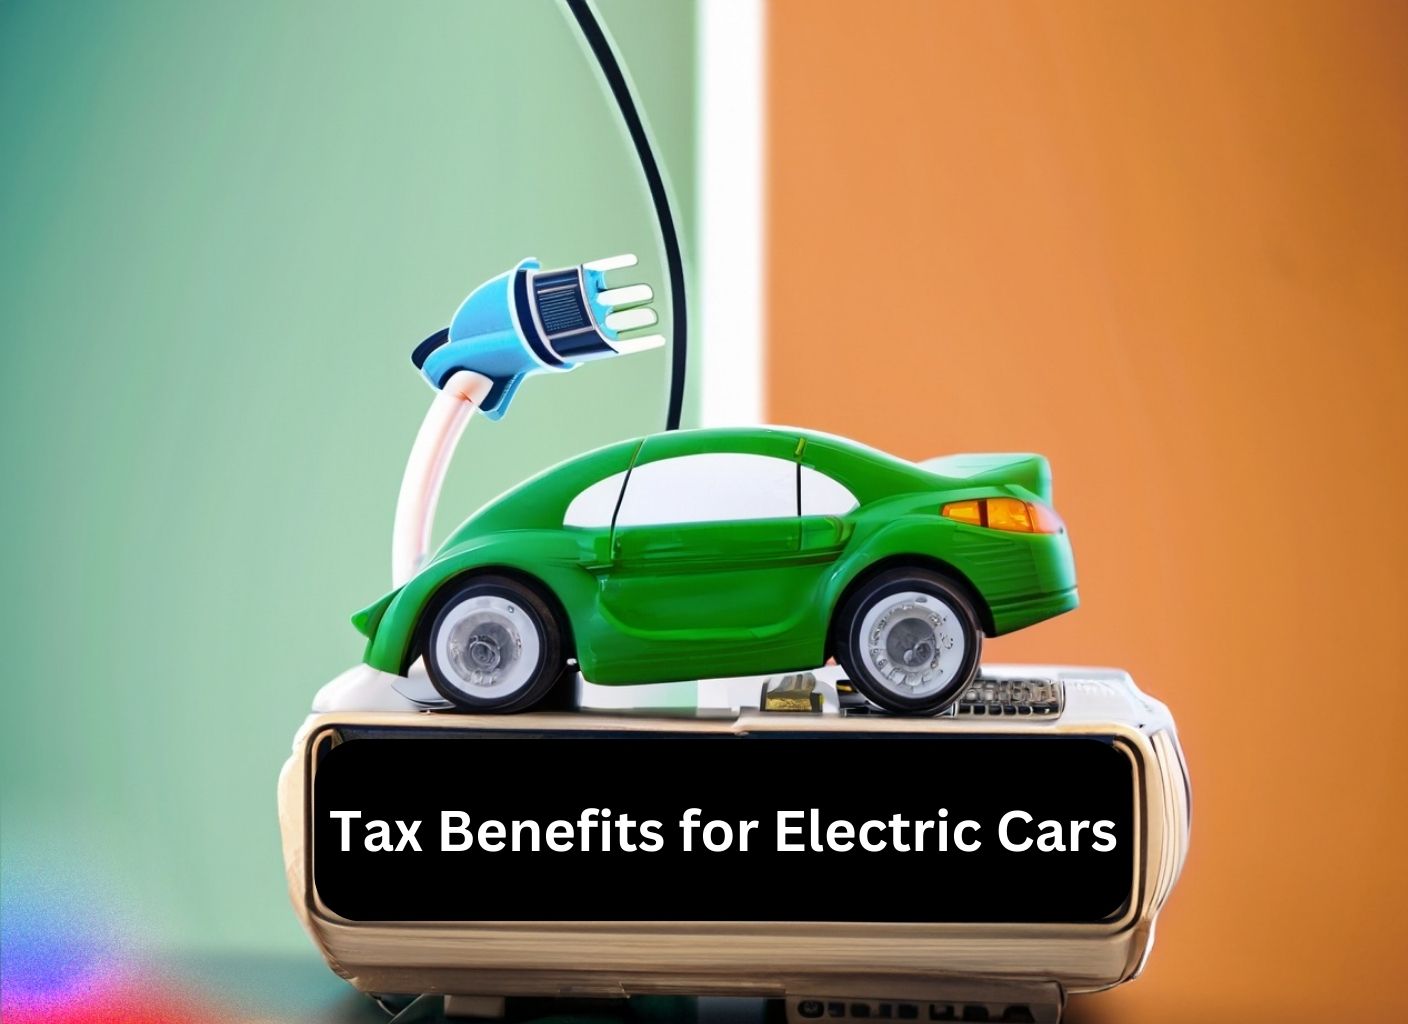 Tax Benefits for Electric Cars in India